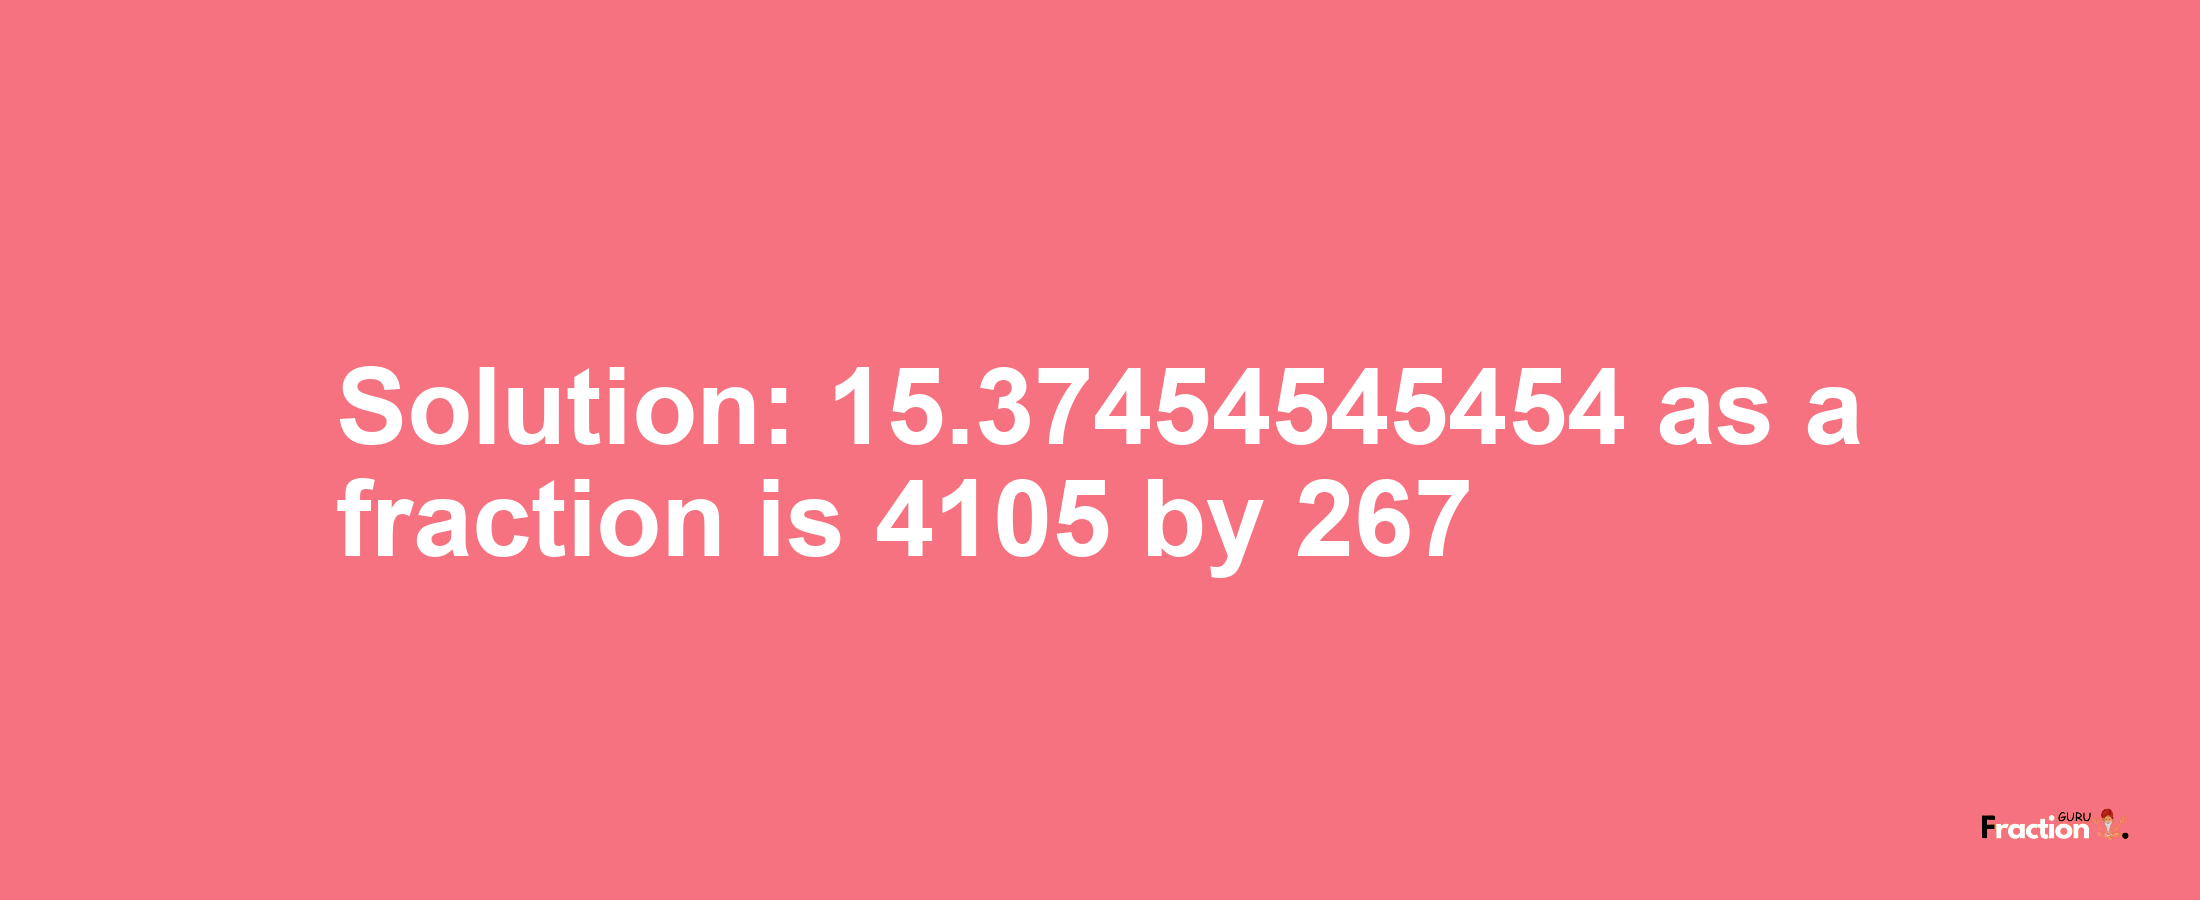 Solution:15.37454545454 as a fraction is 4105/267